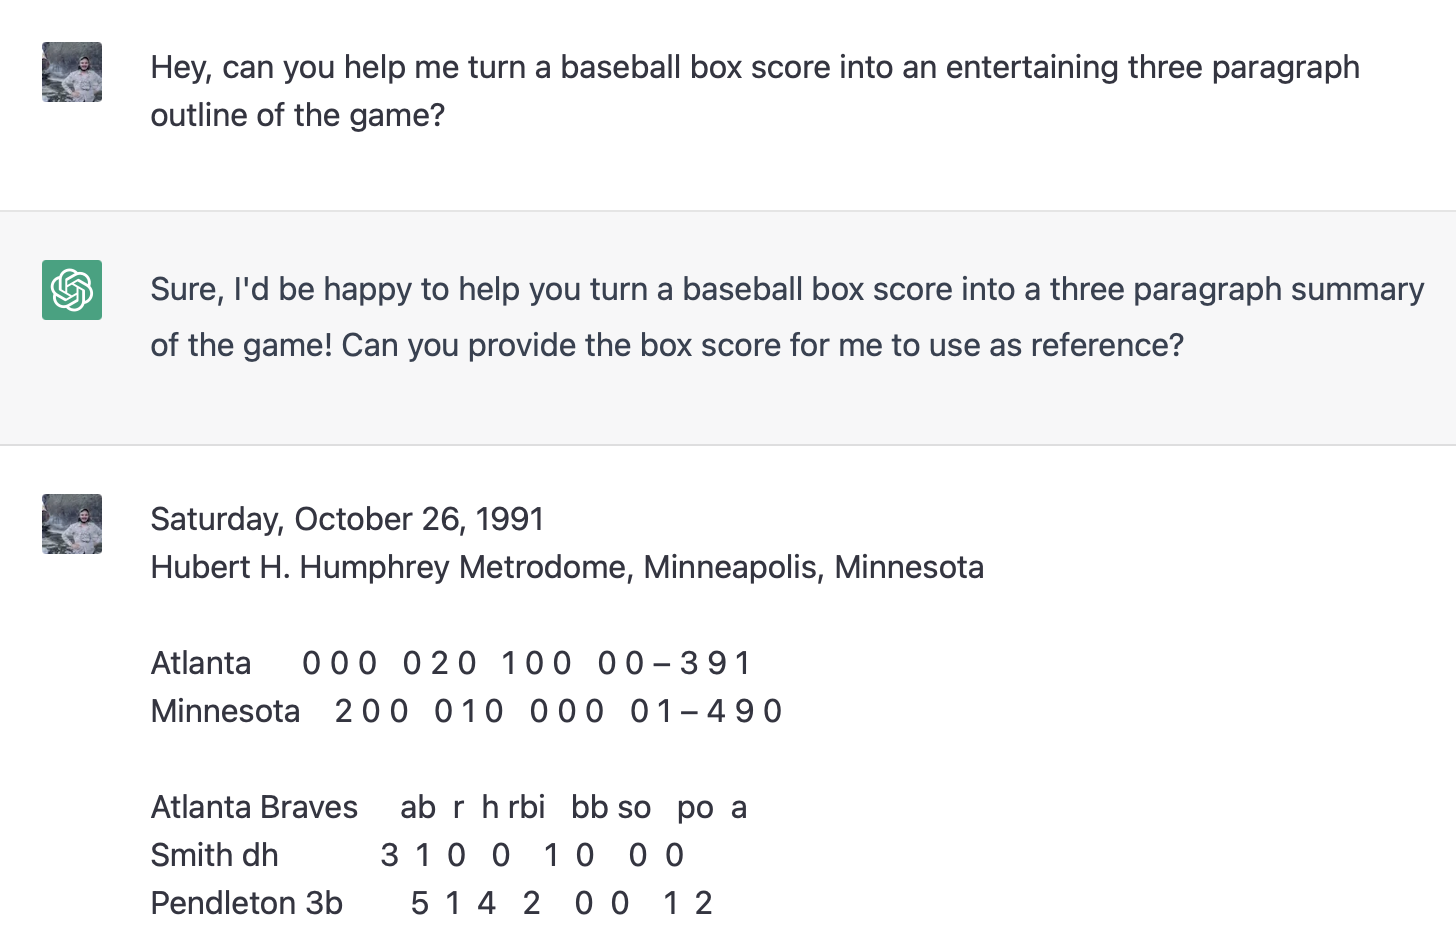 Analytic Prompt - Converting a box score into an entertaining description of the game. Part 1.